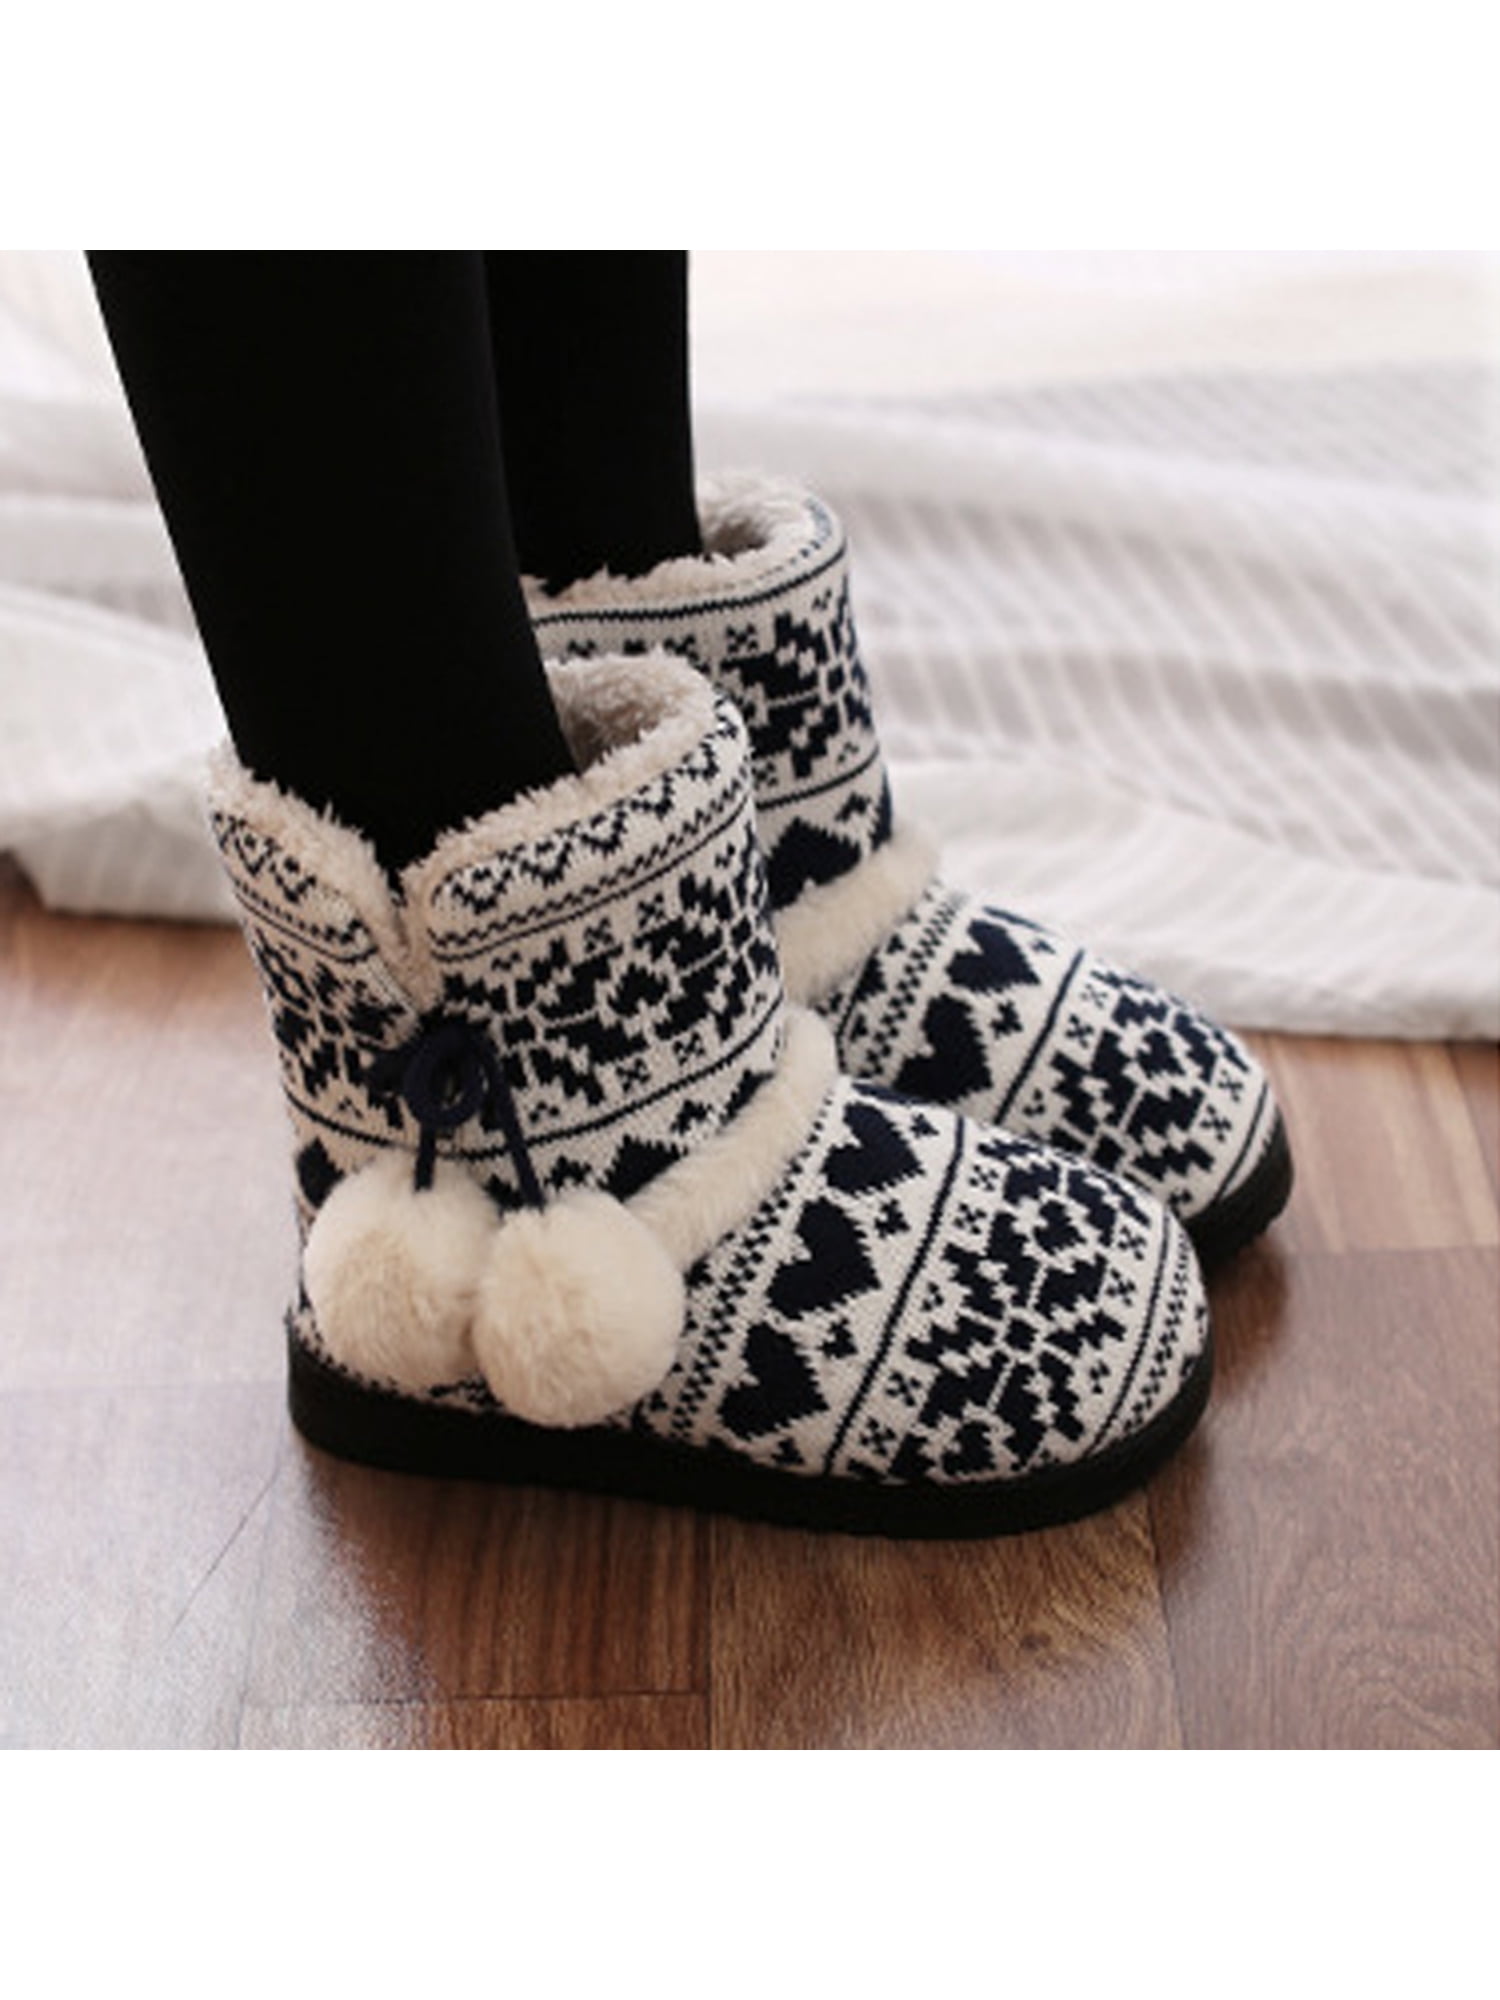 Ladies Slipper Boots Suede Fur Lined Winter Warm Thermal Ankle Bootie Shoes 